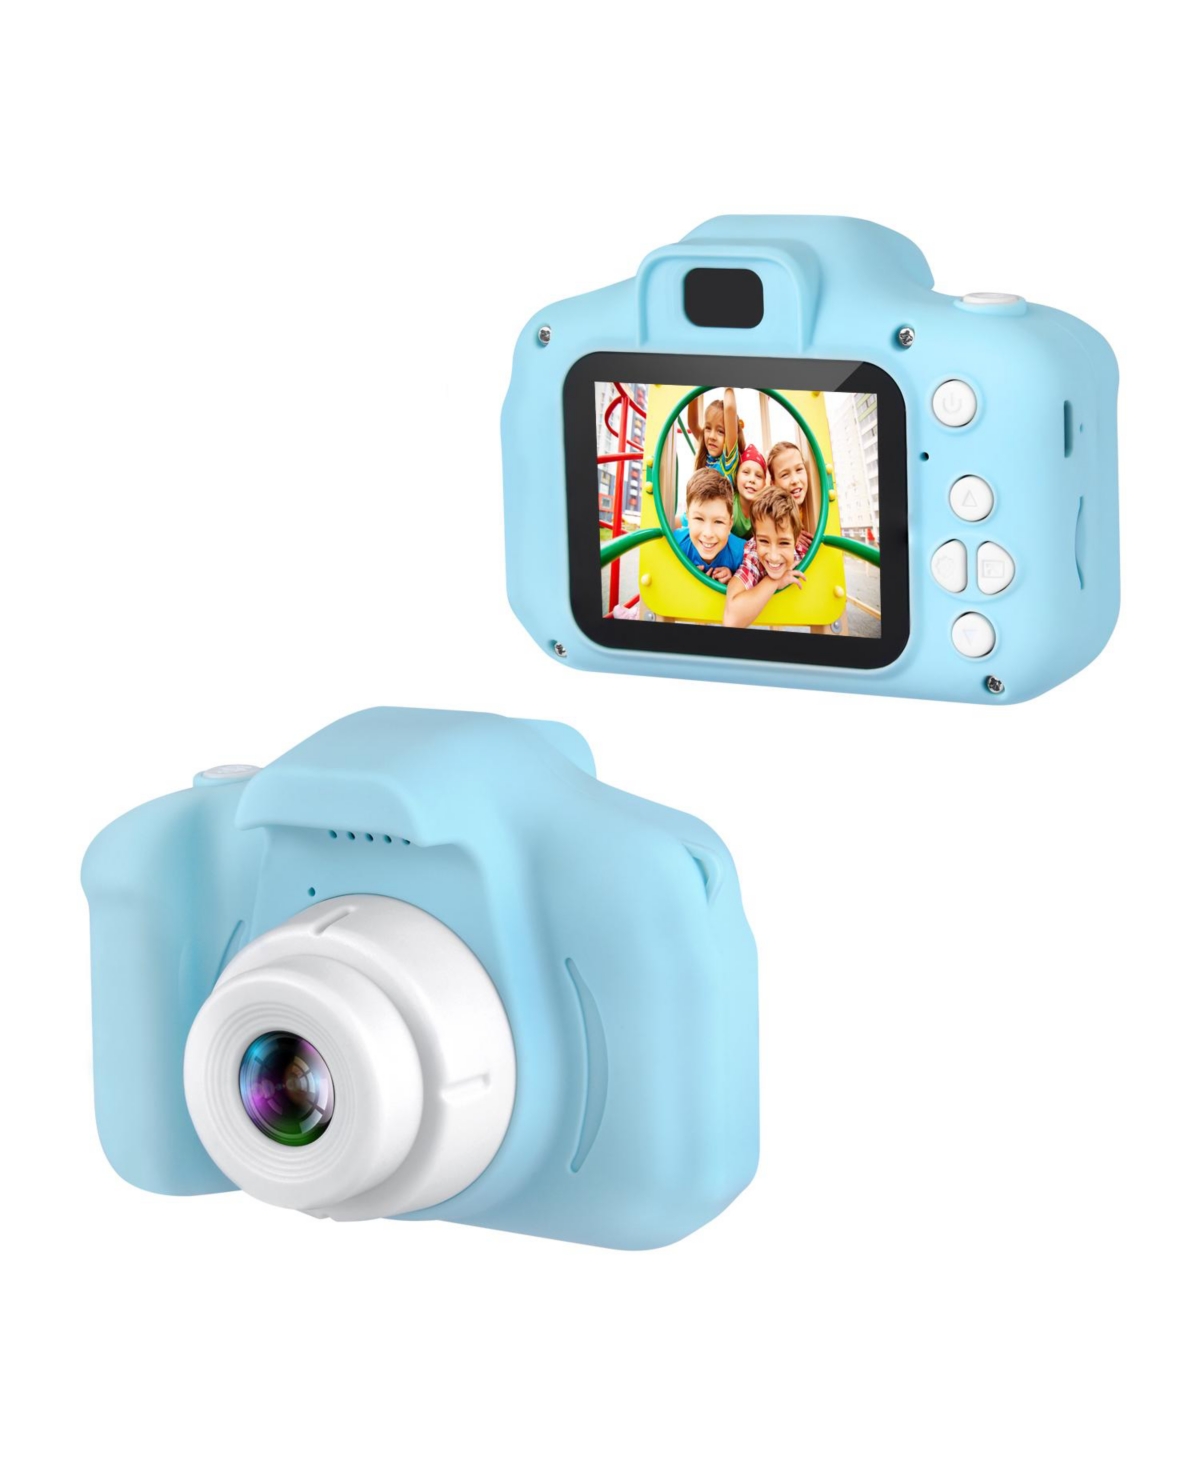 Dartwood 1080p Digital Camera For Kids With 2" Color Display Screen And Micro-sd Card Slot In Blue